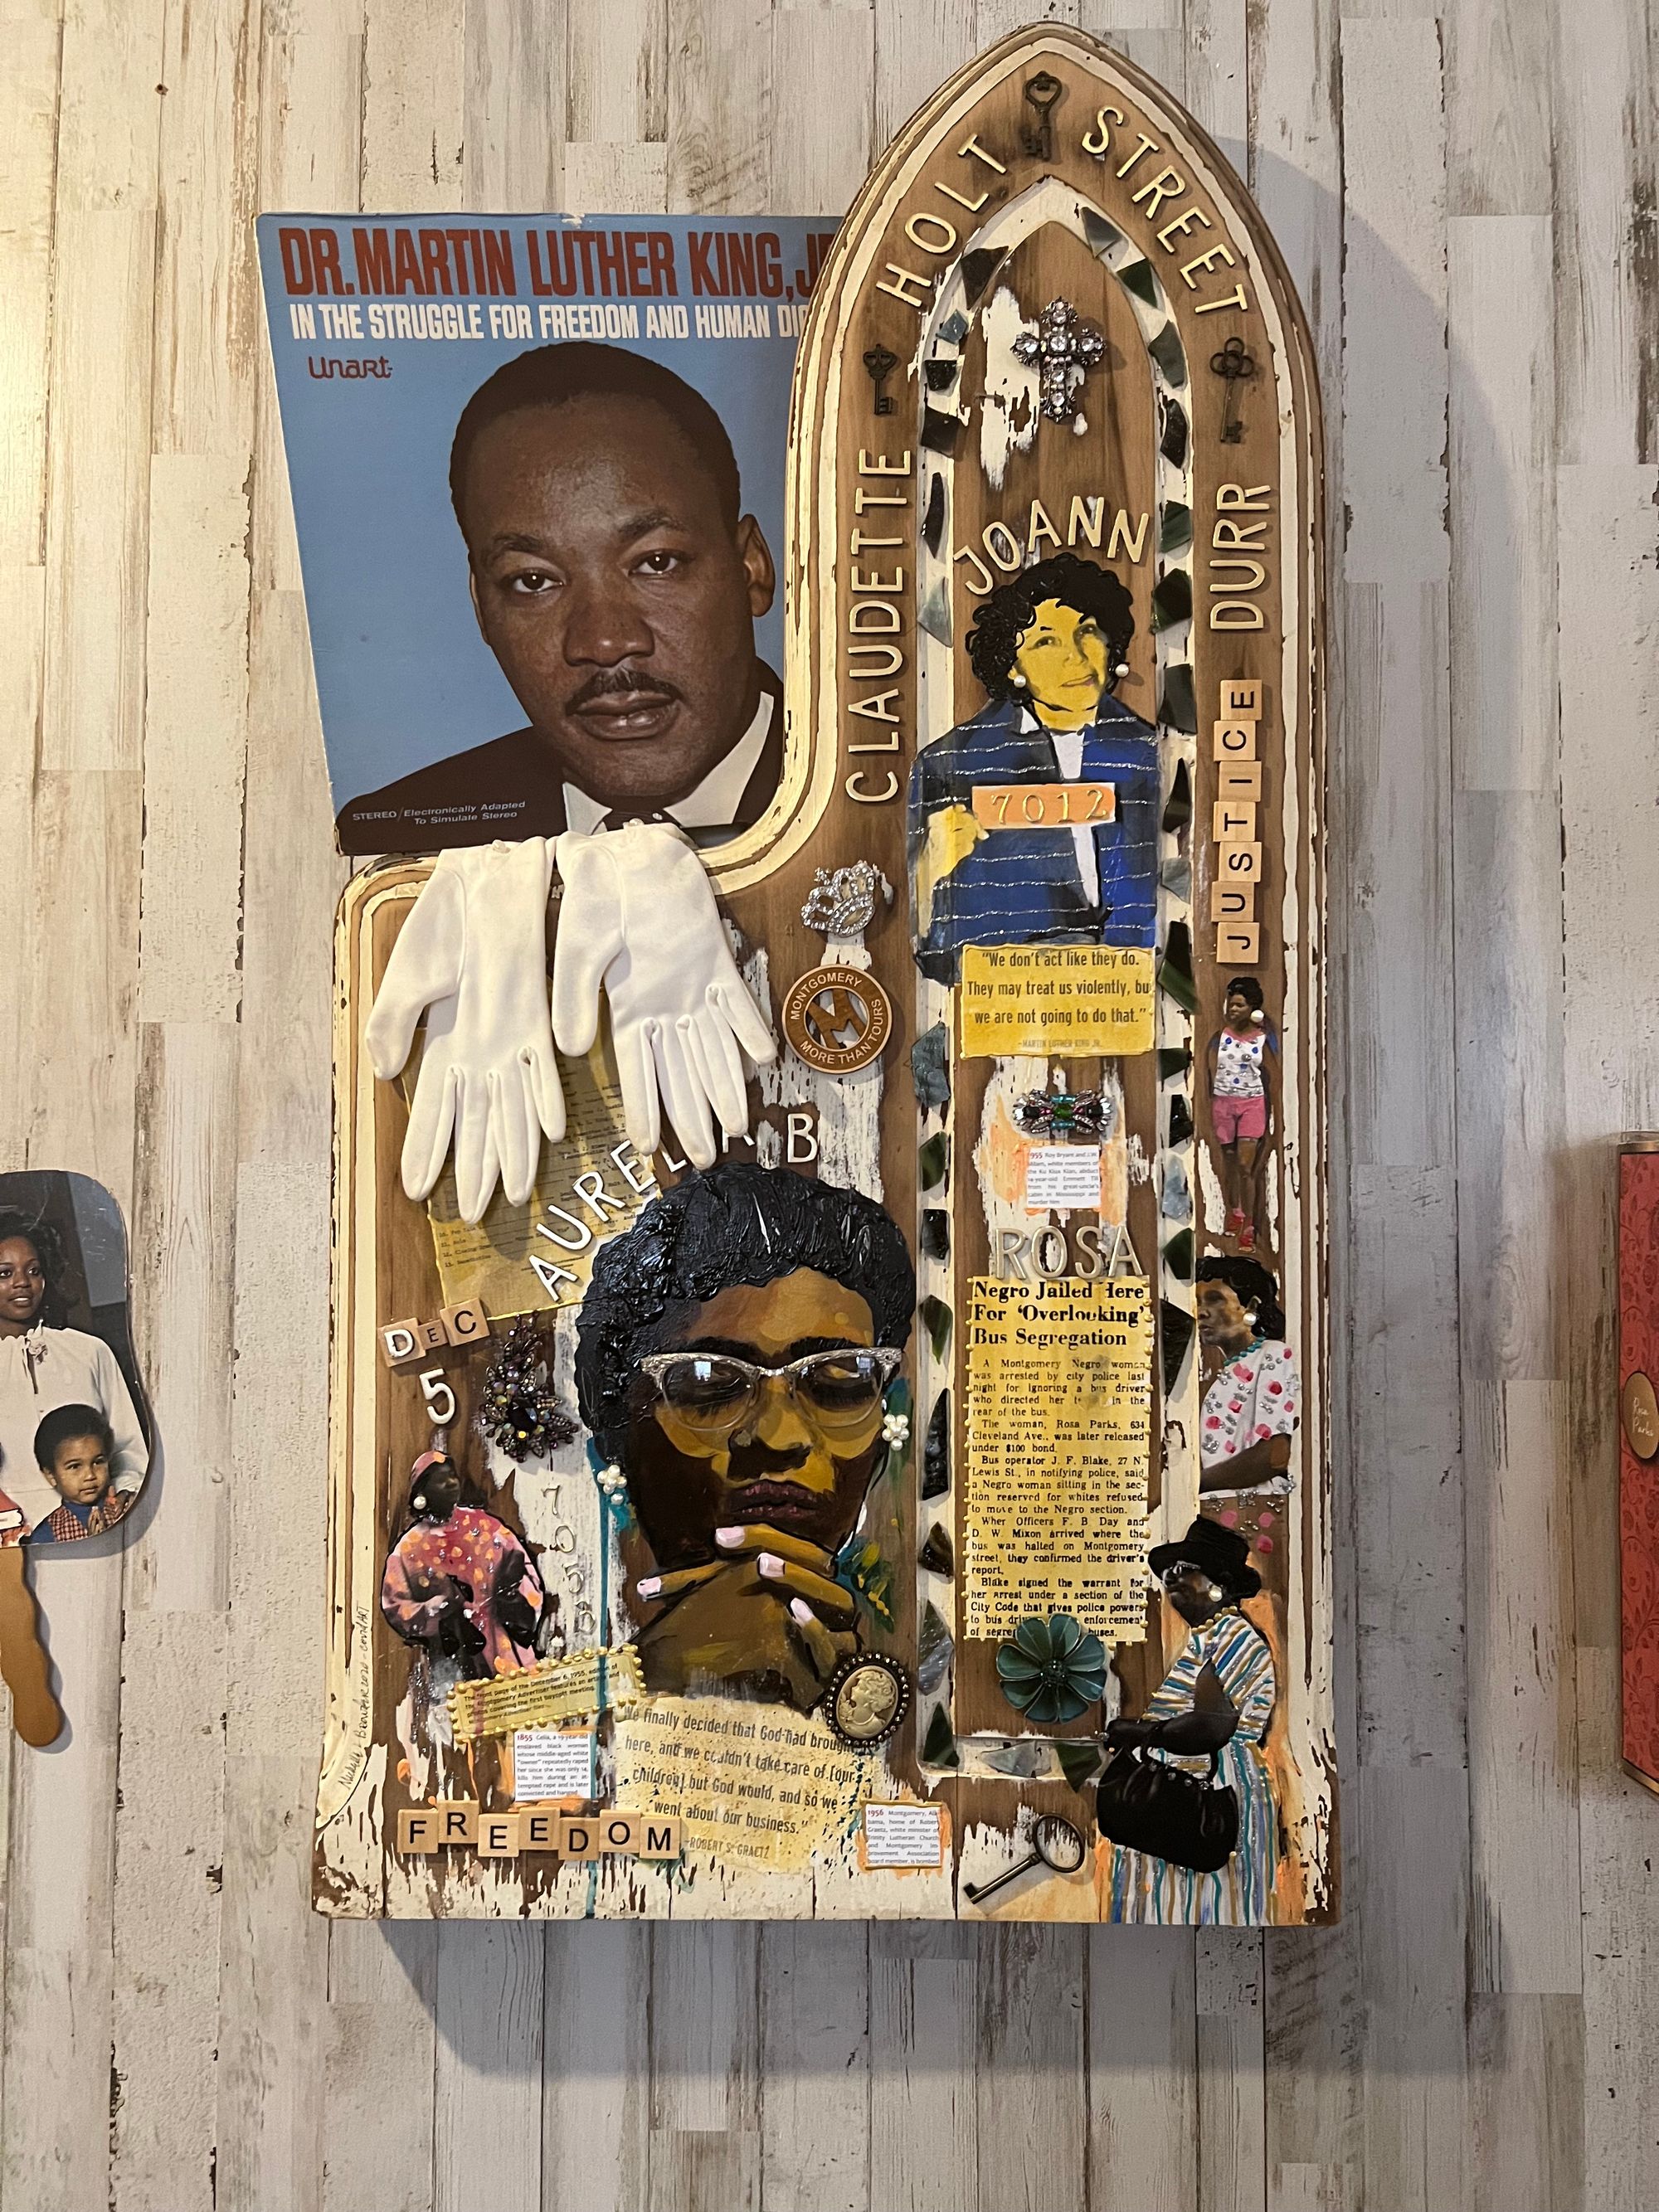 An image of an assemblage art work featuring Martin Luther King Jr., Aurelia, Browder, Rosa Parks and other Civil Rights figures.